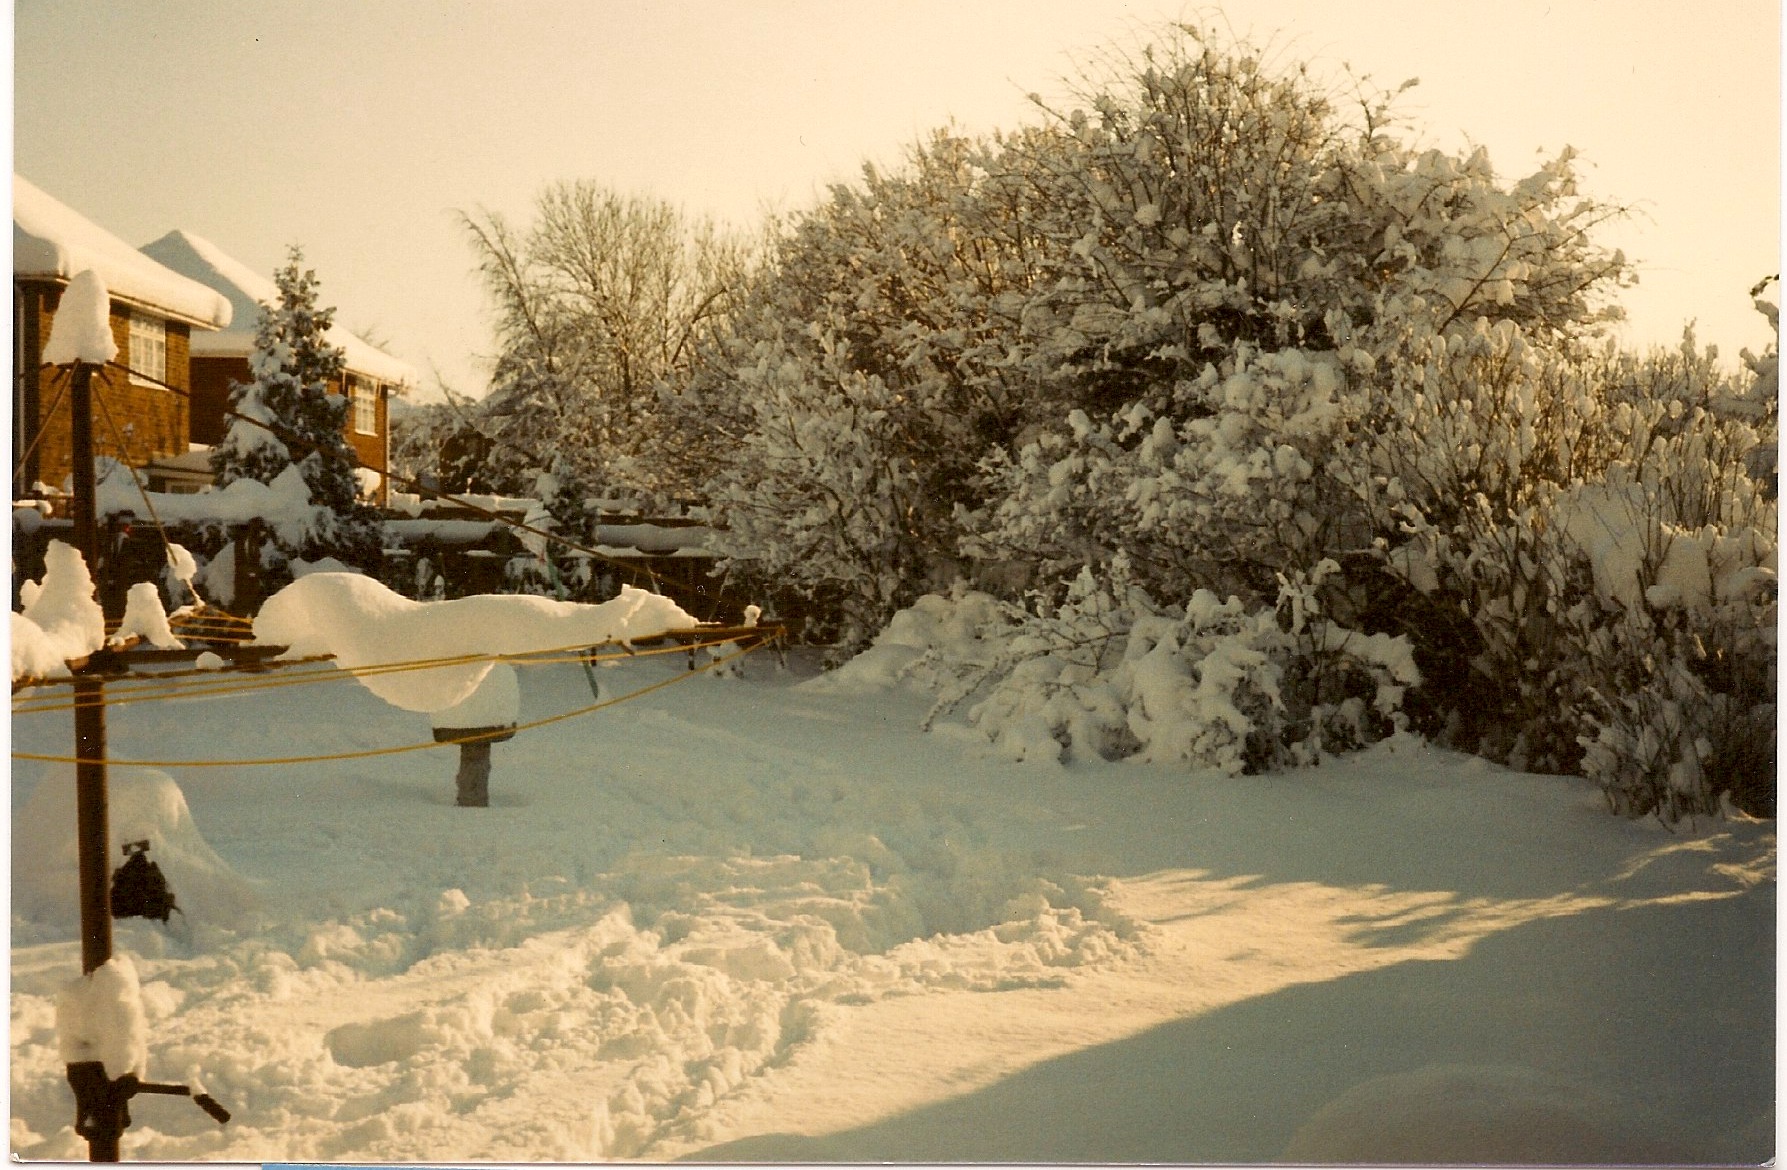 Snow in the garden of 27 Wigmore Road in 1987